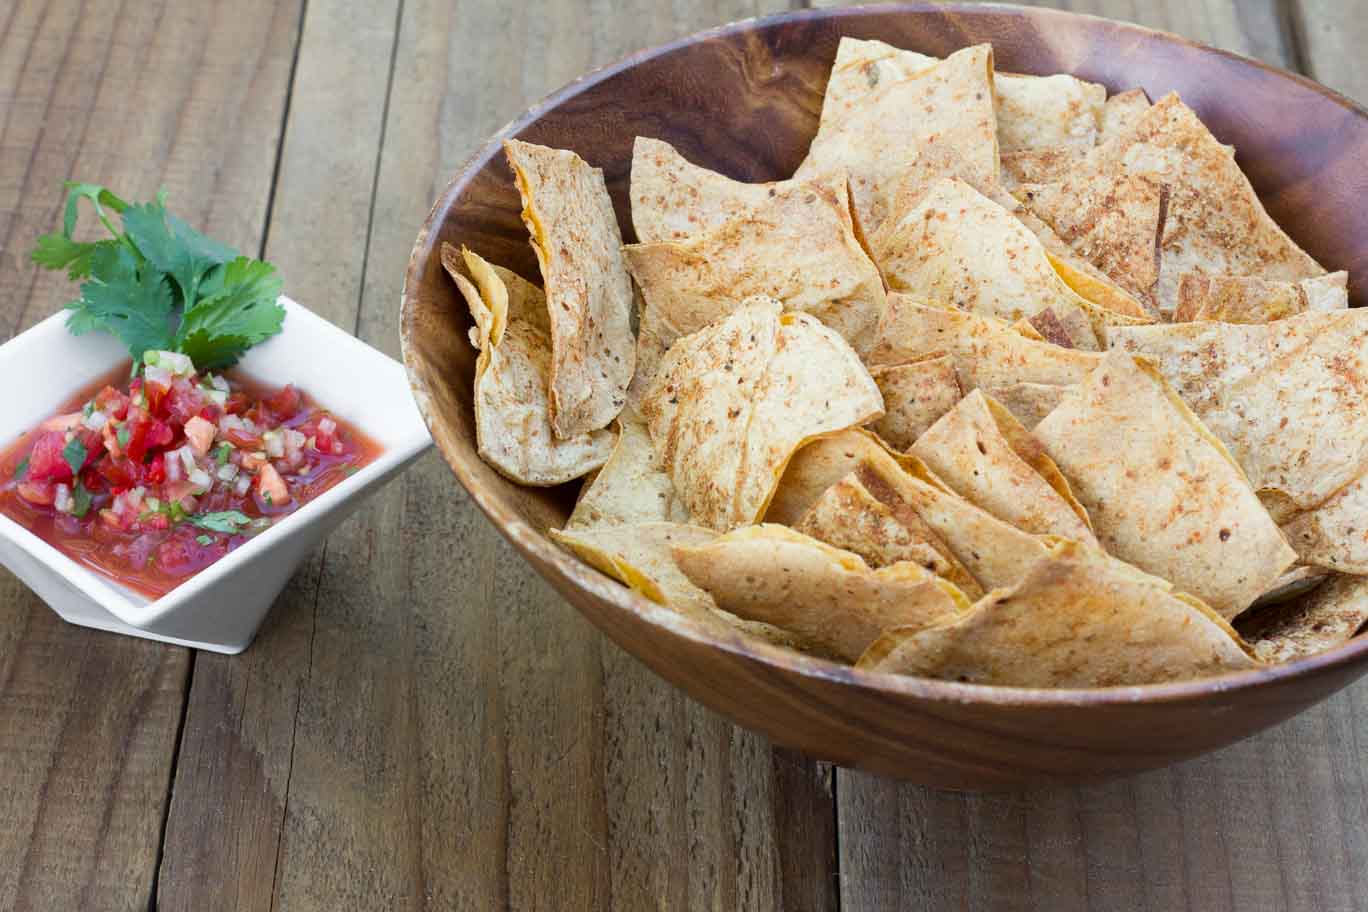 🍪 We Know Whether You’re in Your 20s or 30s Based on Your Snack Preferences tortilla chips